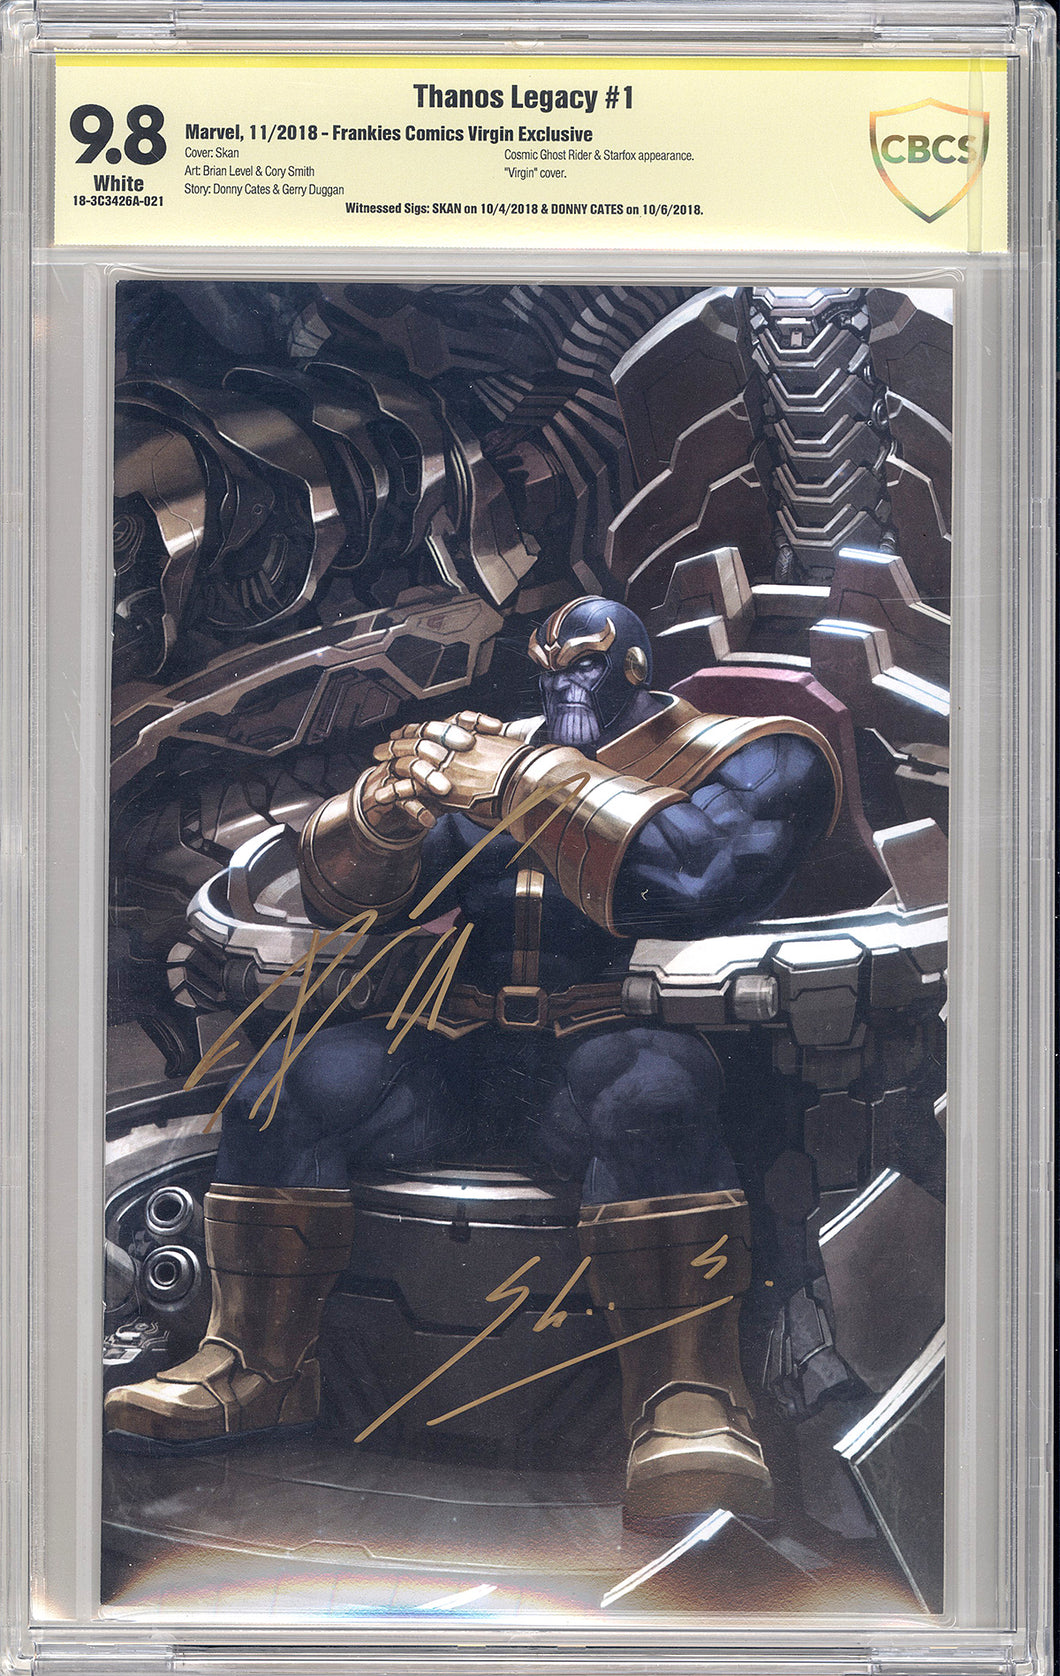 Thanos Legacy #1 - DOUBLE Signed by SKAN & Donny Cates - CBCS 9.8